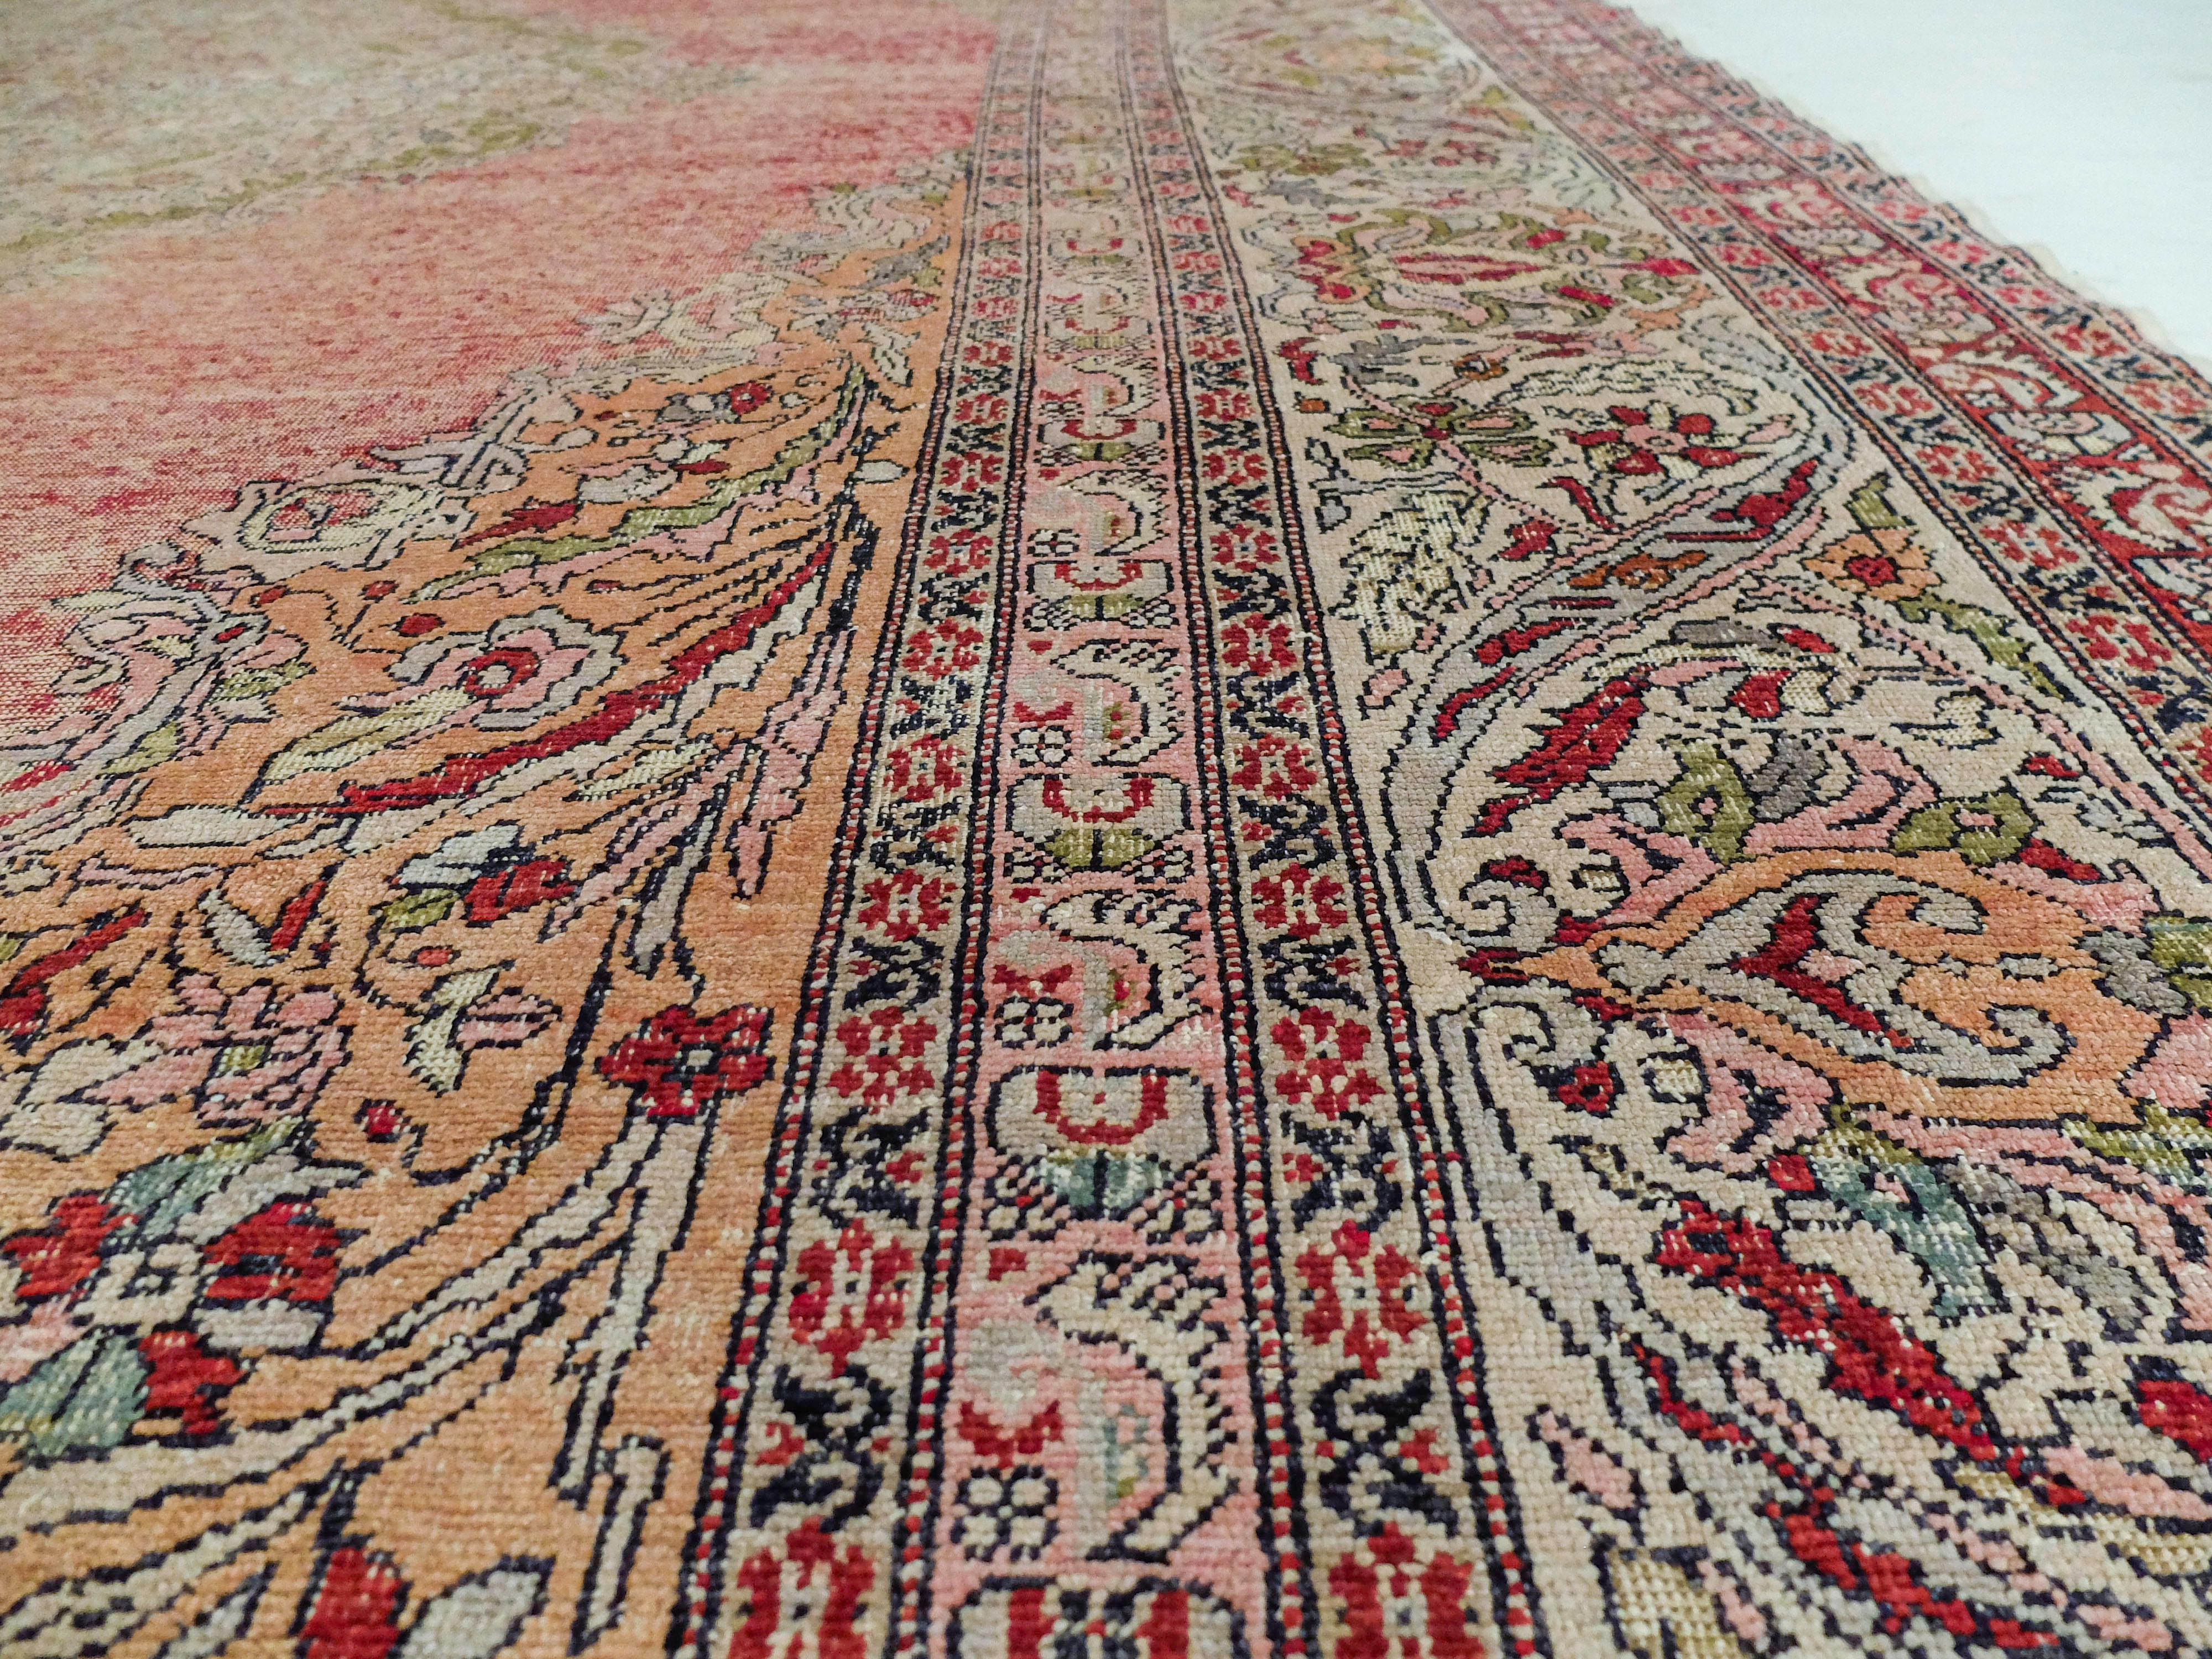 This Turkish Kayseri rug was made c. 1880s. It has a large intricate diamond in the middle composed of smaller floral and organic shapes. This shape is surrounded by a red field, and bordered by more floral patterns. This rug has several patterns